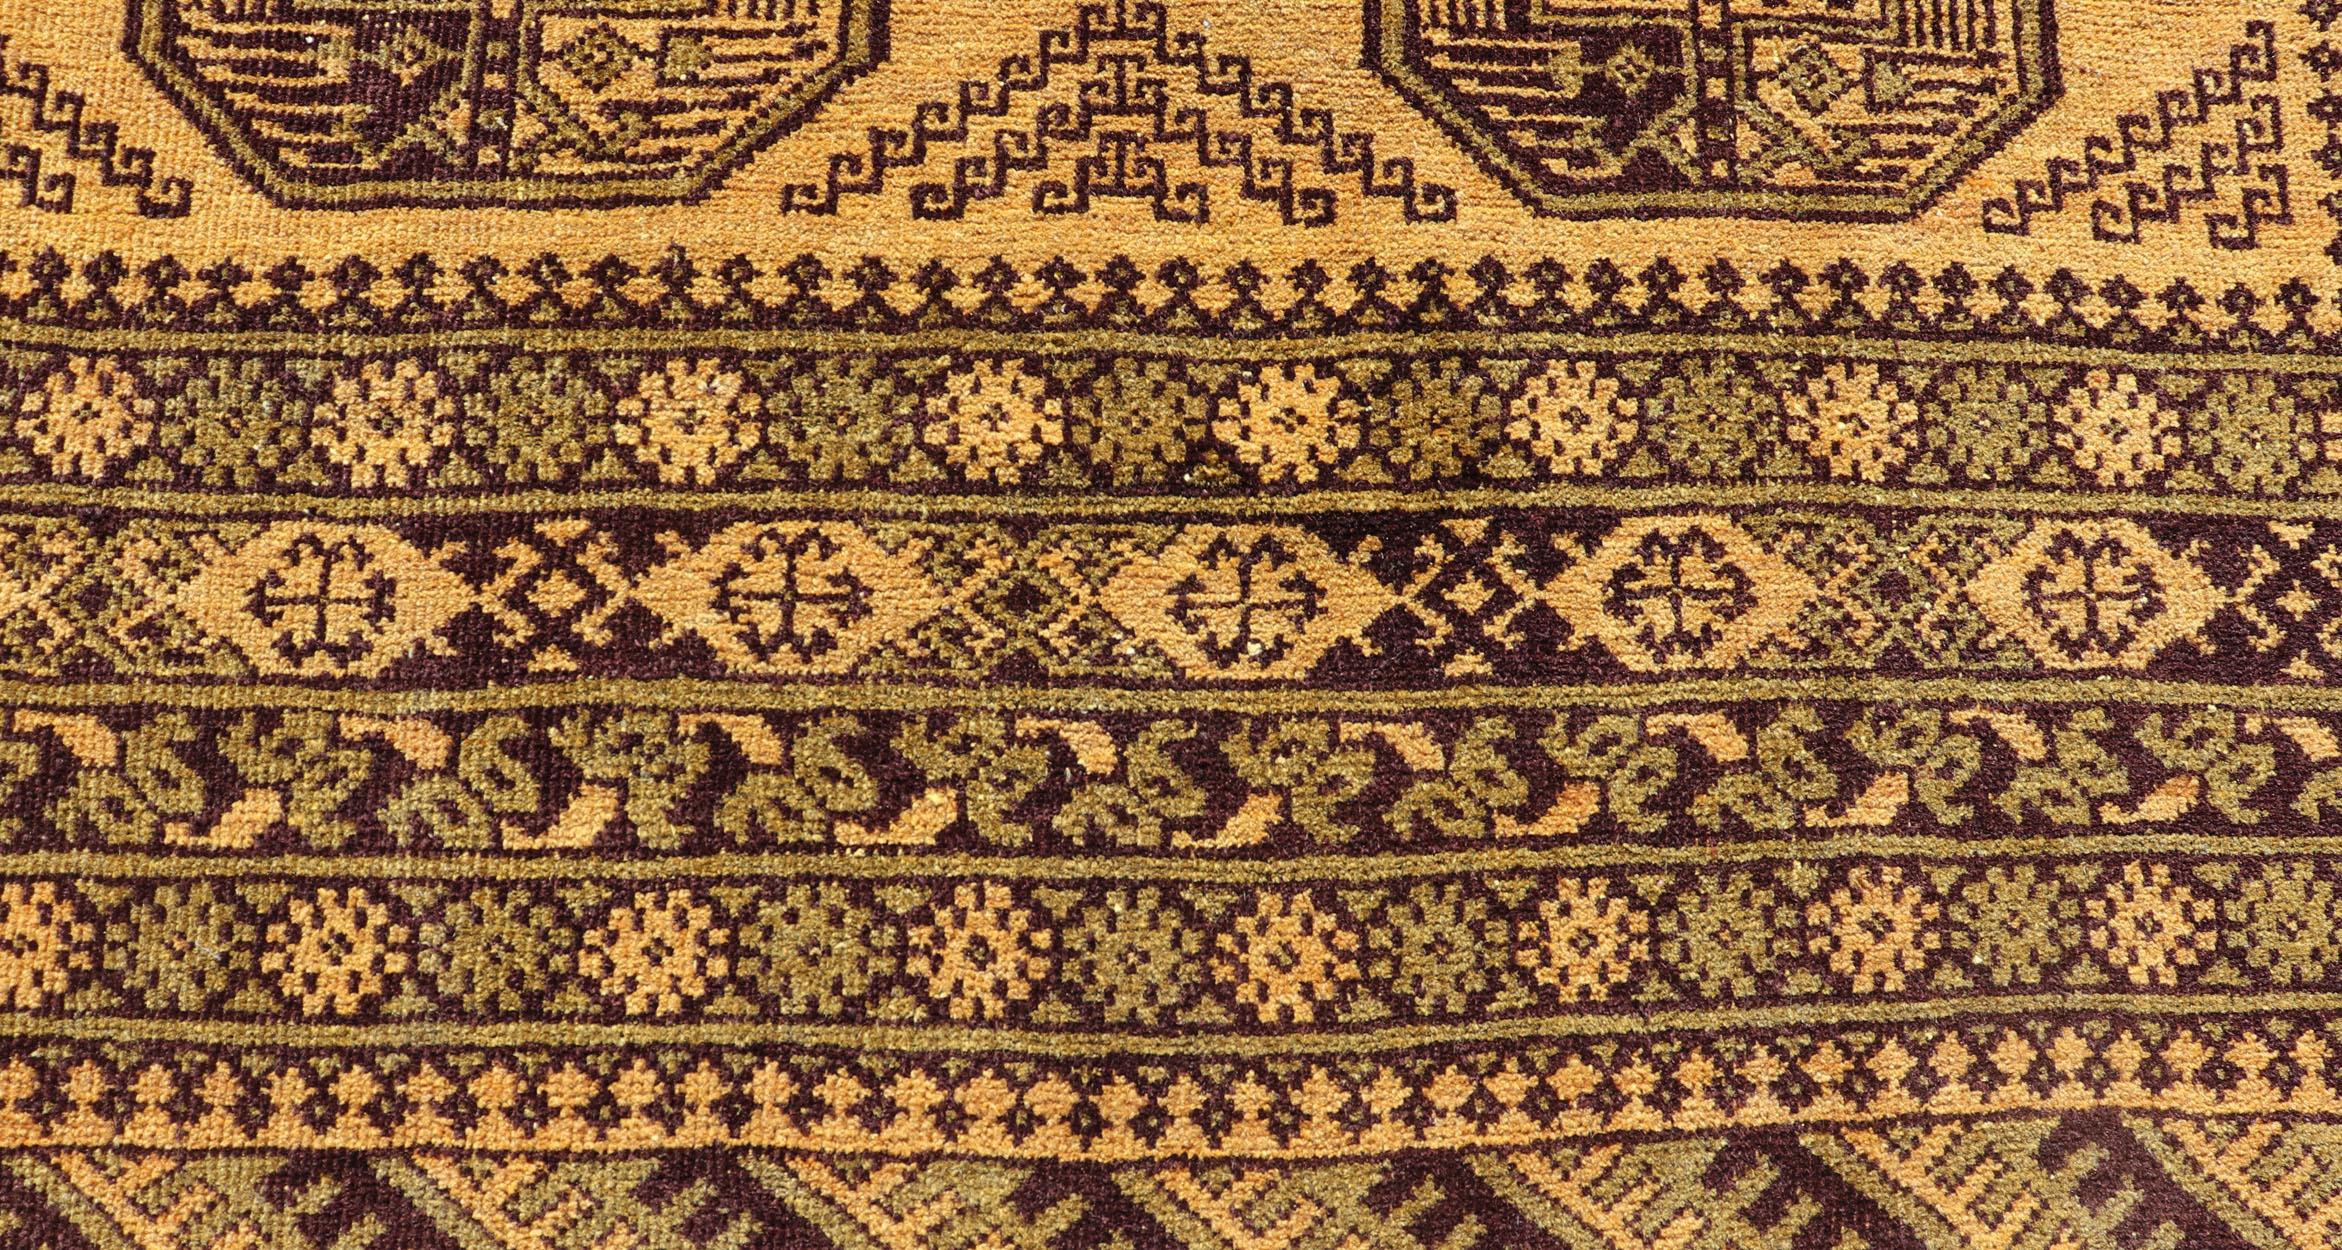 Hand-Knotted Ersari Rug in Wool with Gul Design in Green, Marigold and Brown In Good Condition For Sale In Atlanta, GA